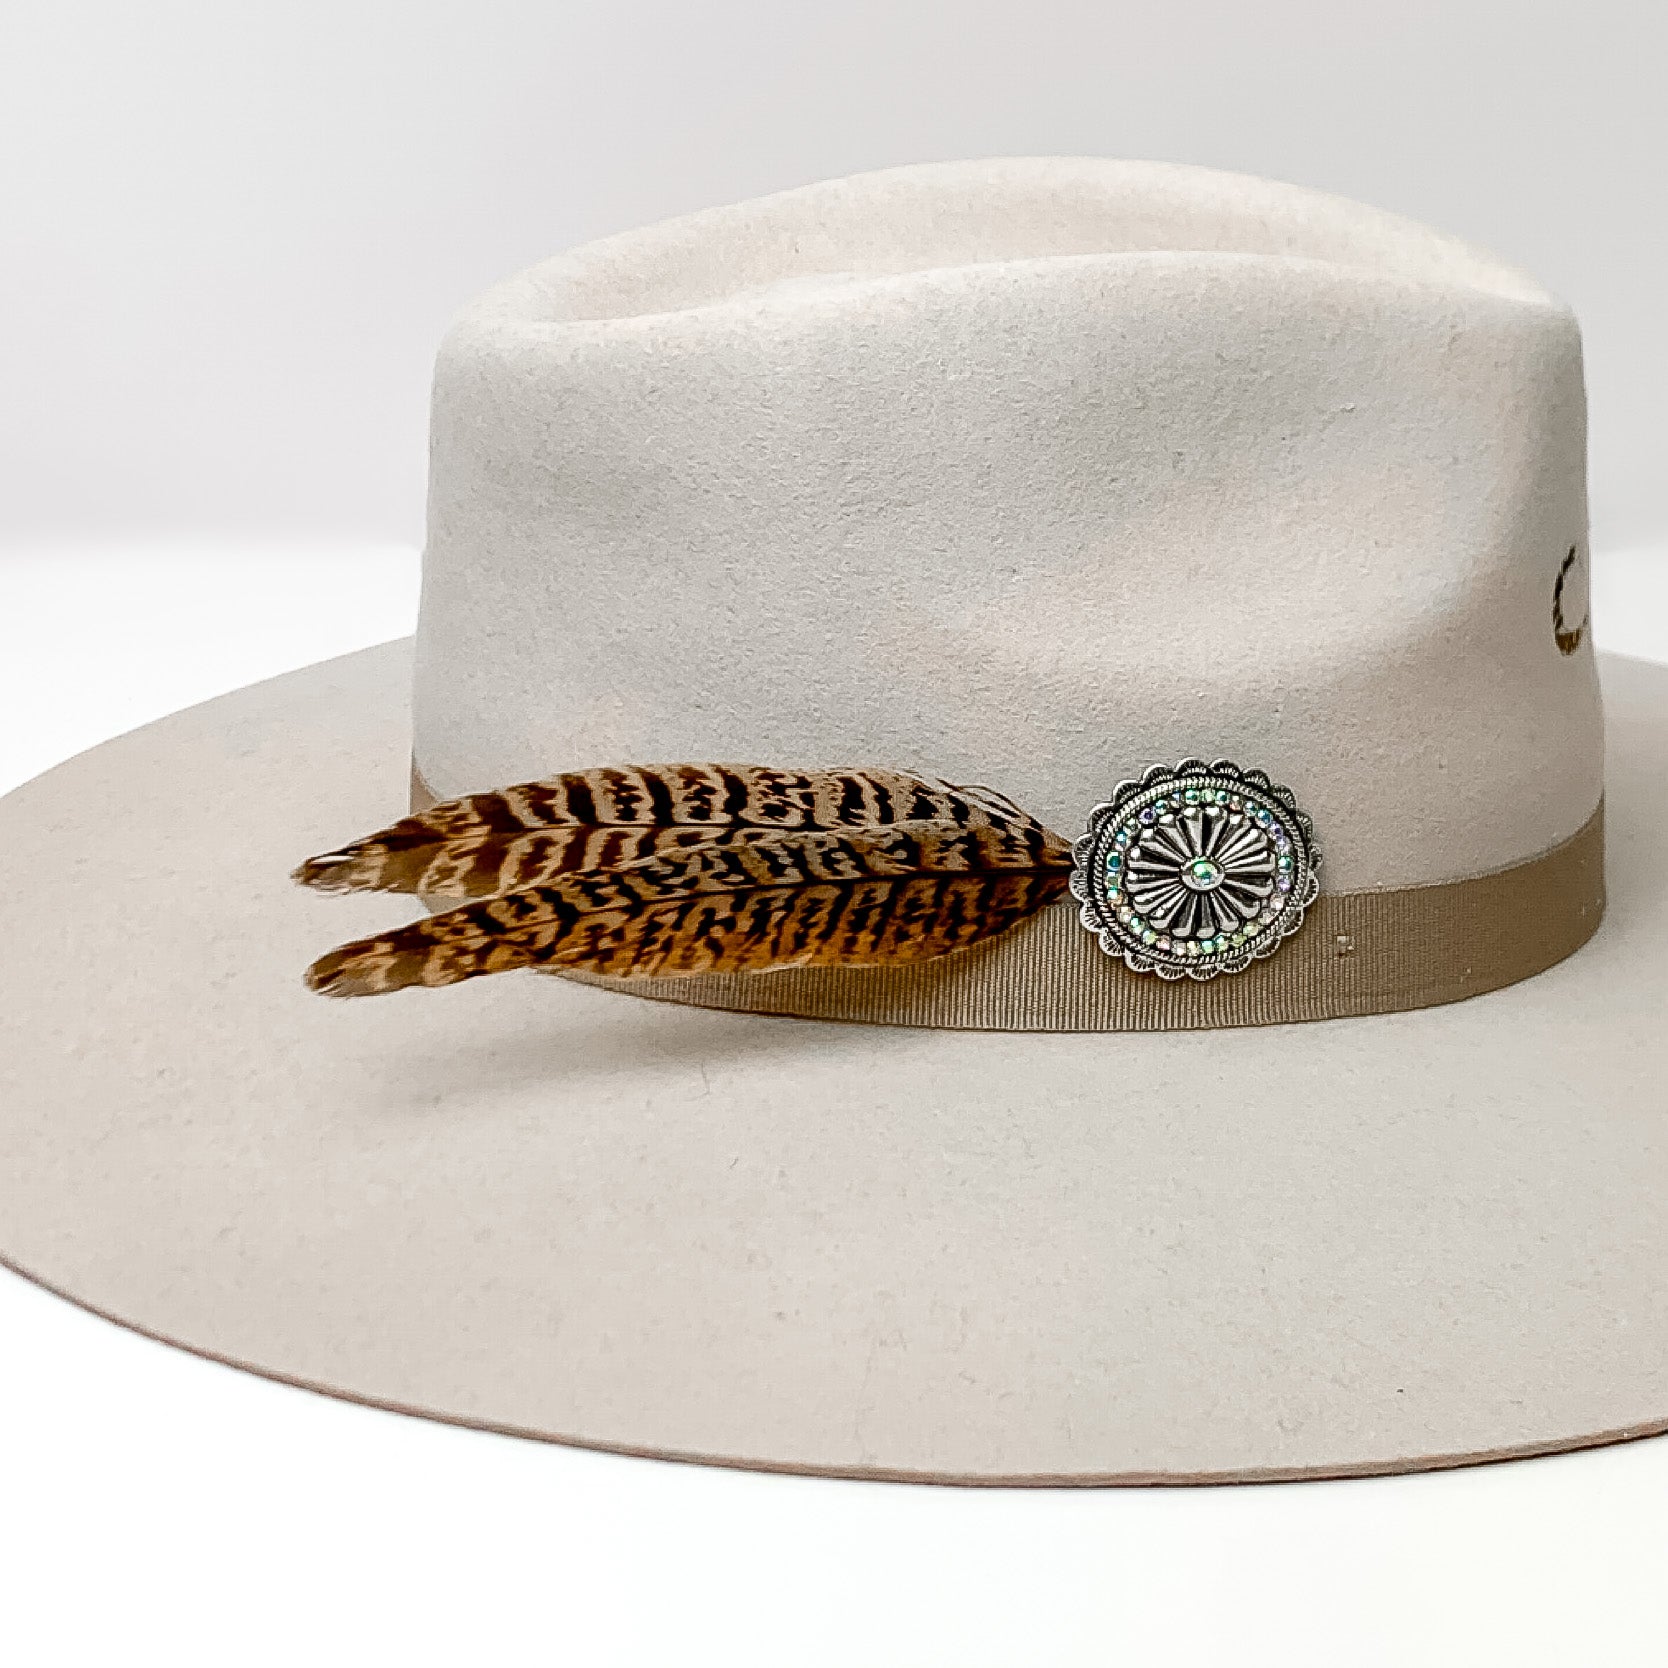 Large Oval Concho and Two Long Feathers Hat Pin with AB Crystals. Pictured on a white background with the pin on the side of a light grey/ brown hat.